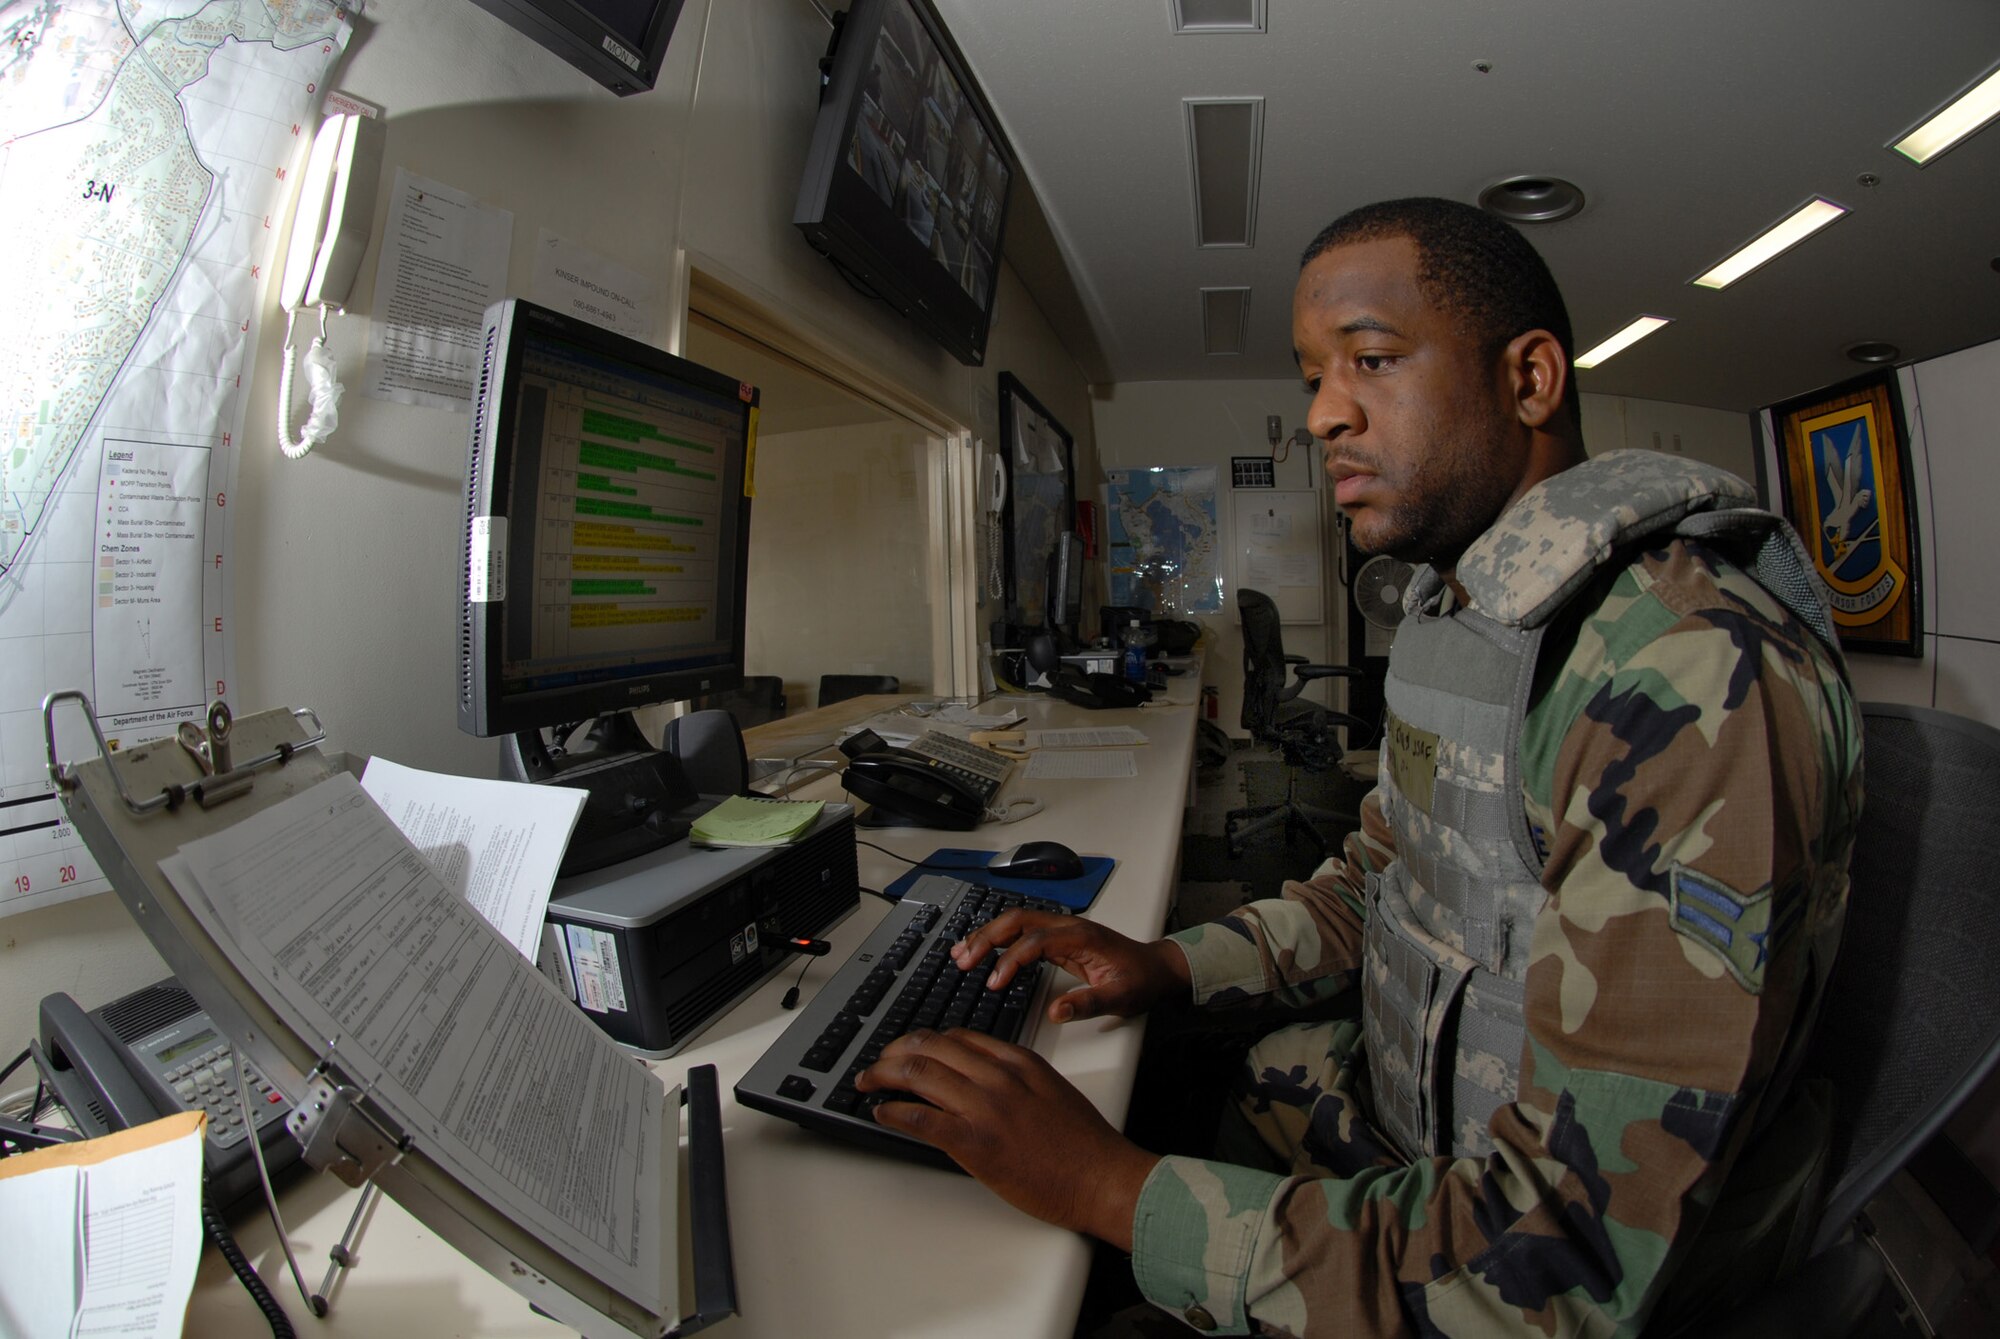 Airman 1st Class Wayne Richard, 18th Security Forces Squadron, inputs real-world blotter entries while participating in the 2008 Pacific Air Forces Operational Readiness Inspection at Kadena Air Base, Japan, March 13, 2008. PACAF conducted the inspection from March 9 to 15 to validate the mission readiness of the 18th Wing. (U.S. Air Force photo/Tech. Sgt. Jason Edwards)